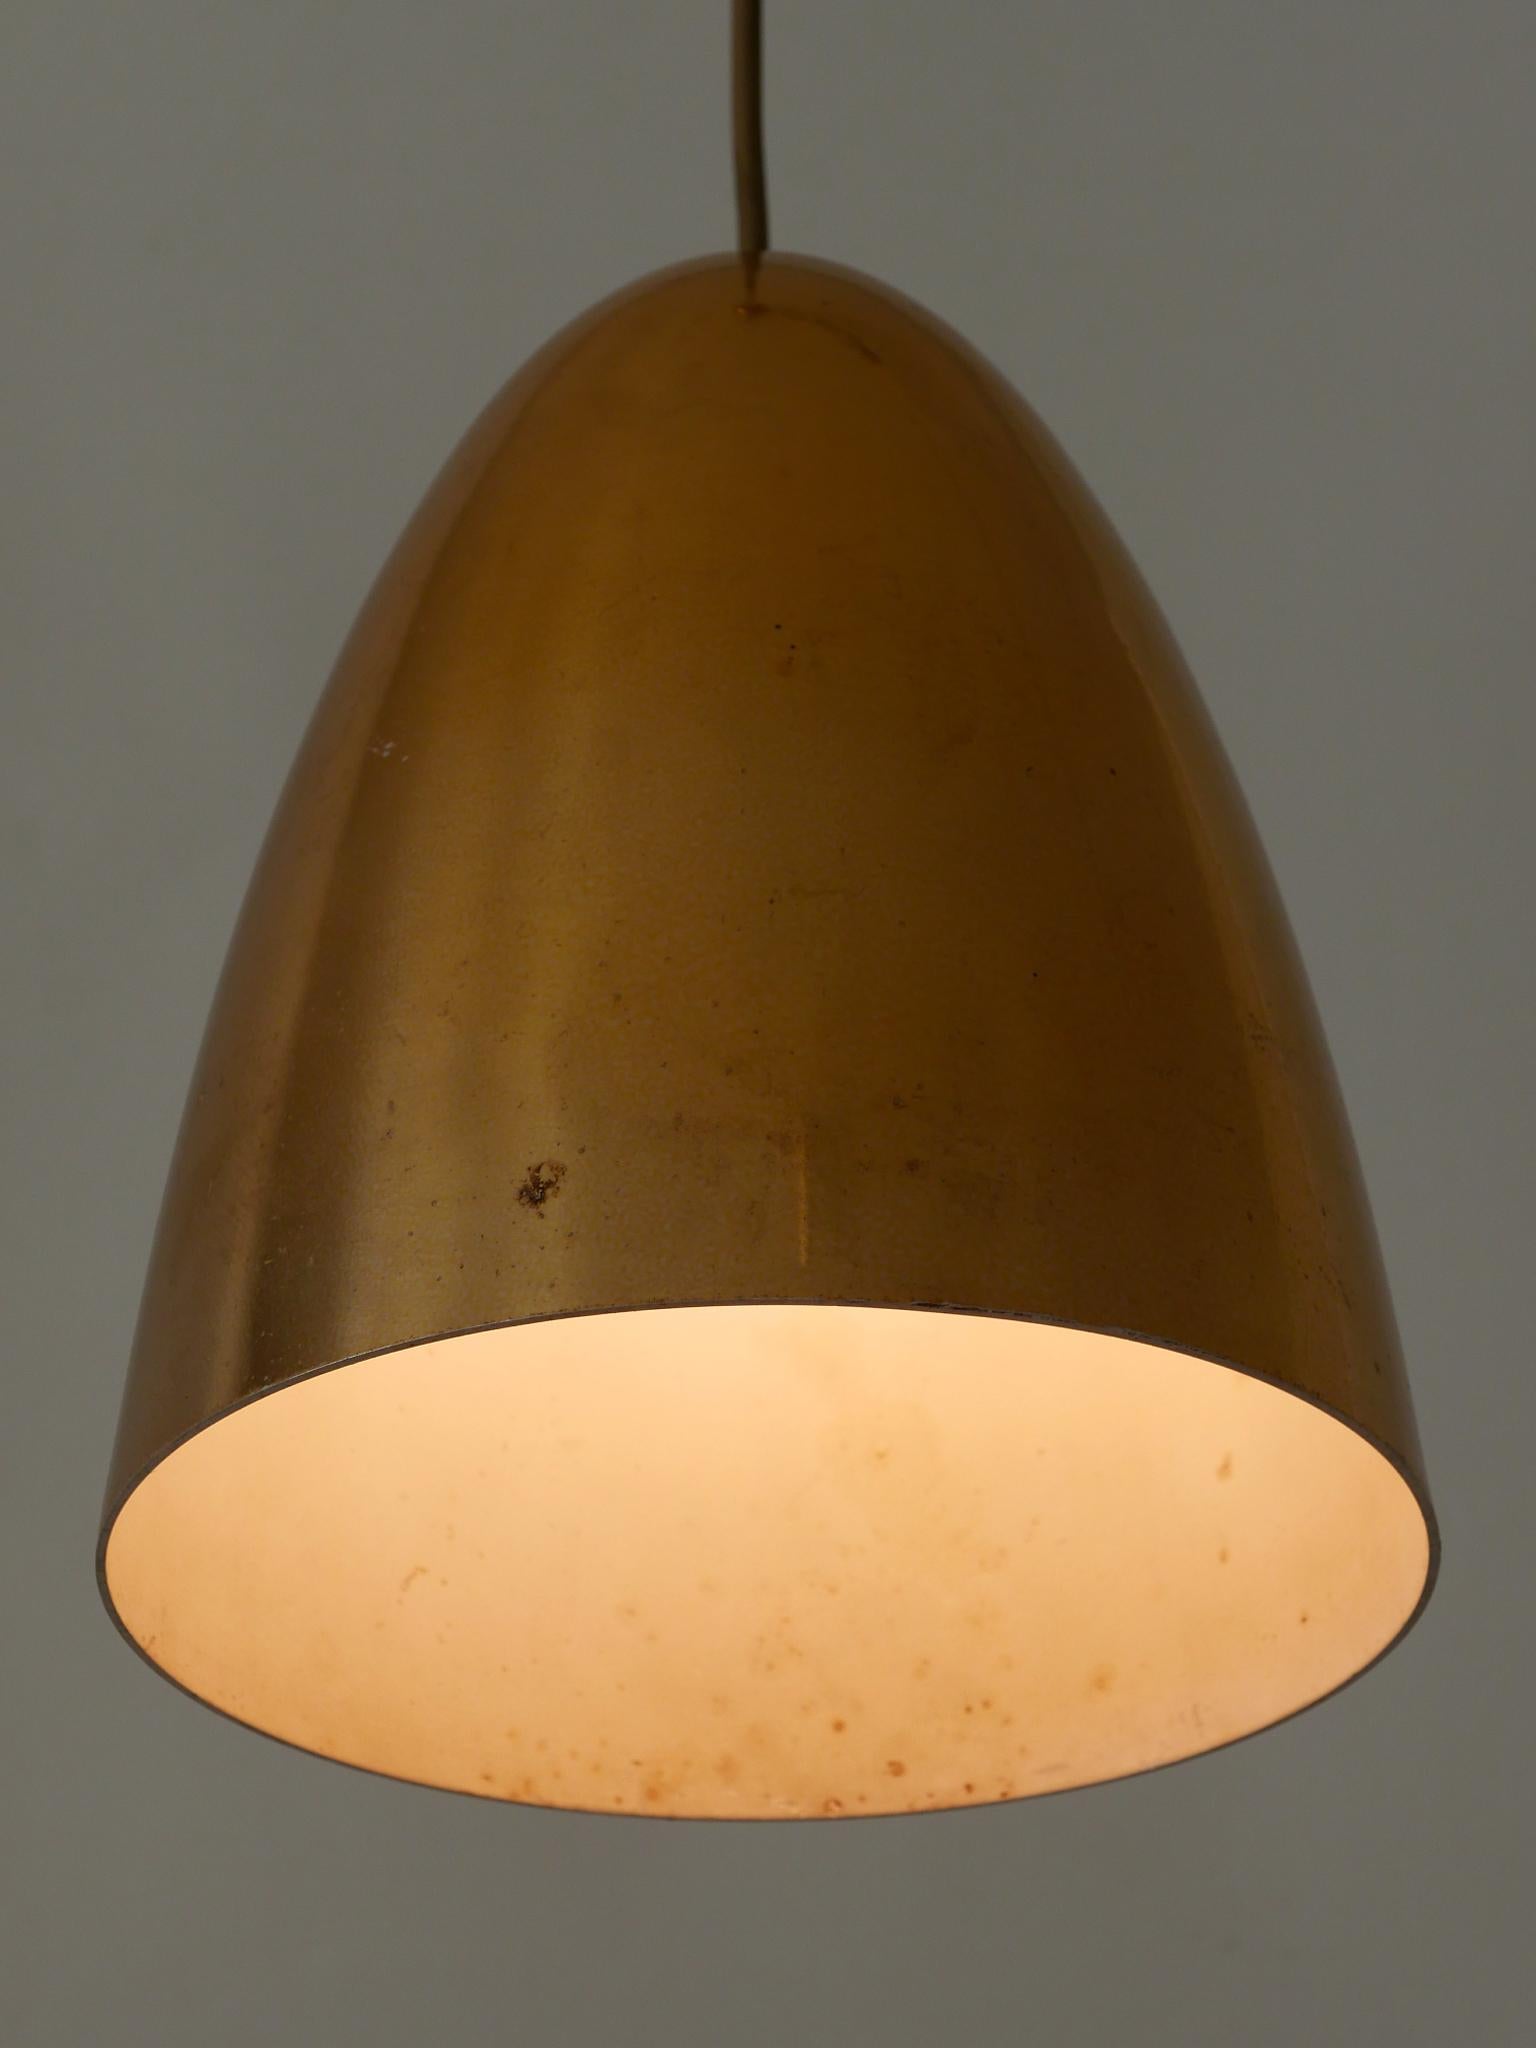 1 of 4 Elegant Mid Century Modern Pendant Lamps or Hanging Lights Germany 1950s For Sale 2